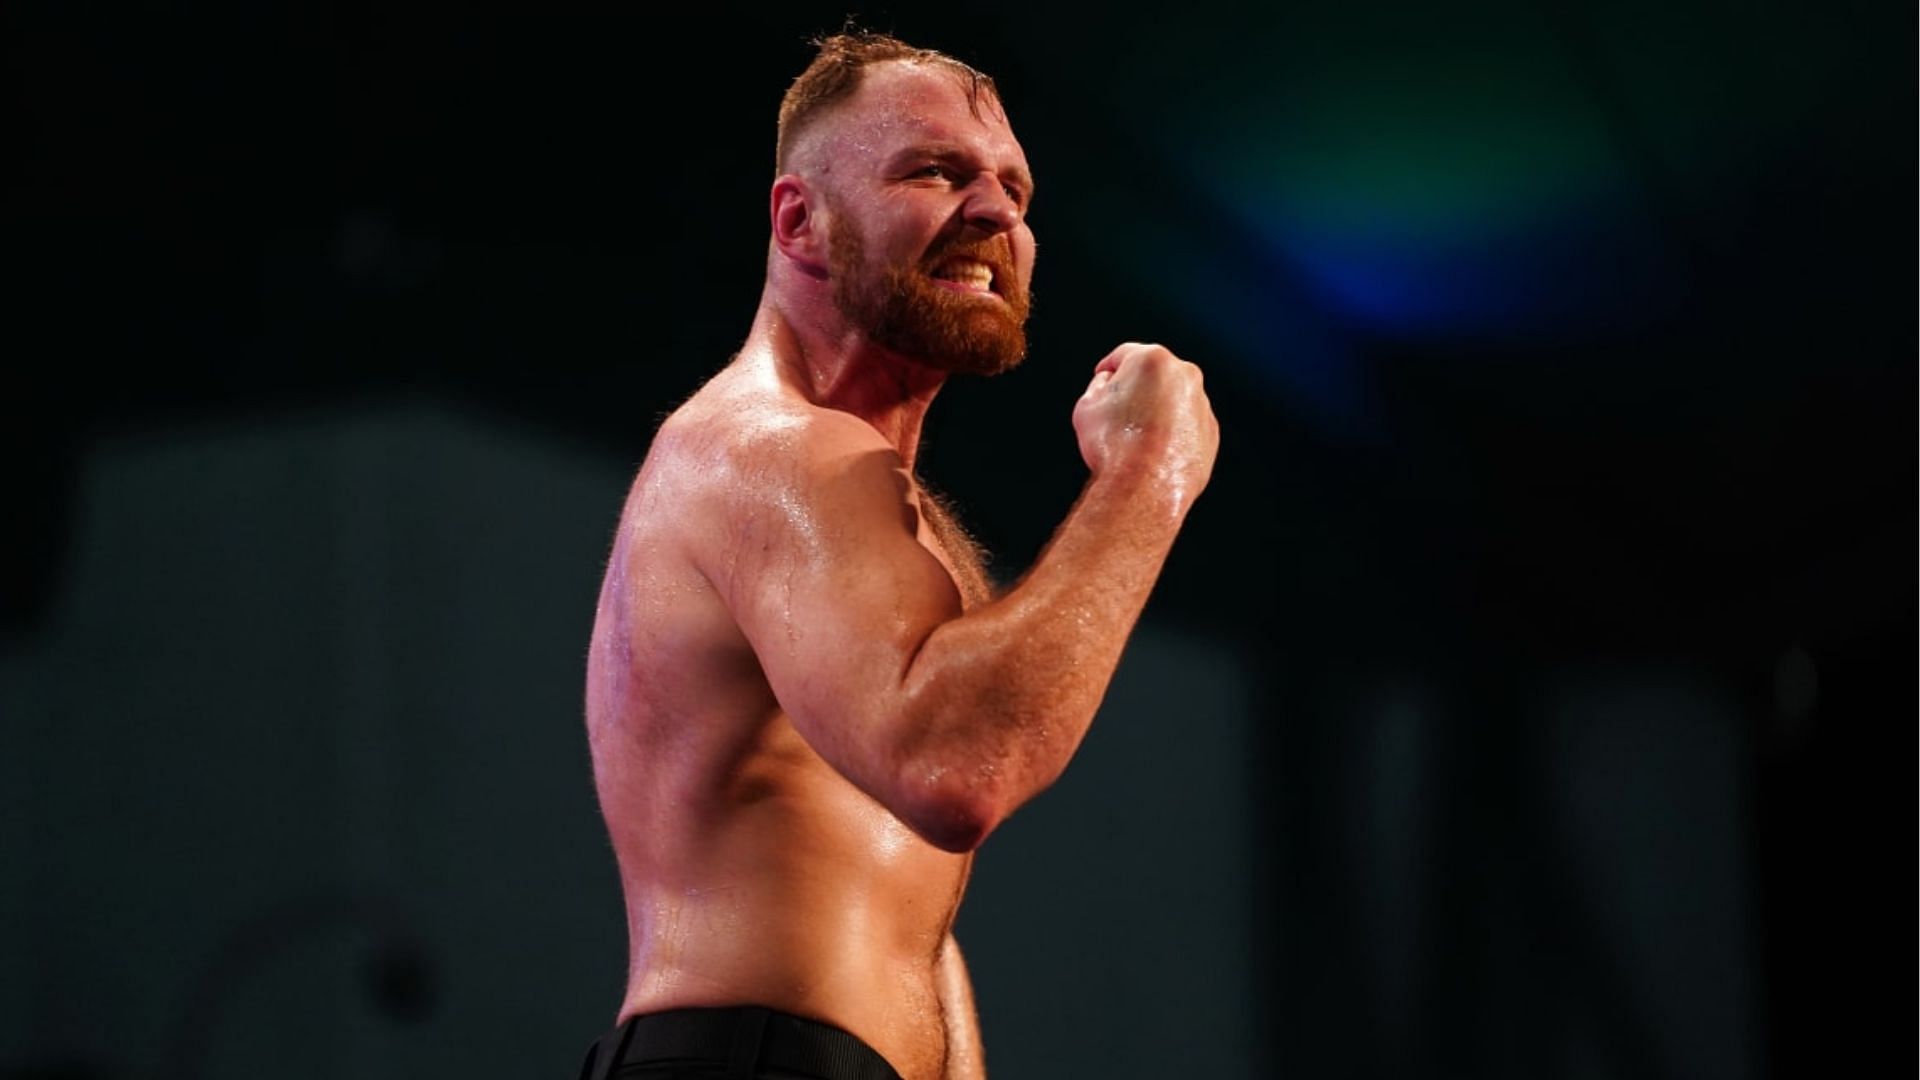 Jon Moxley is a three time AEW World Champion